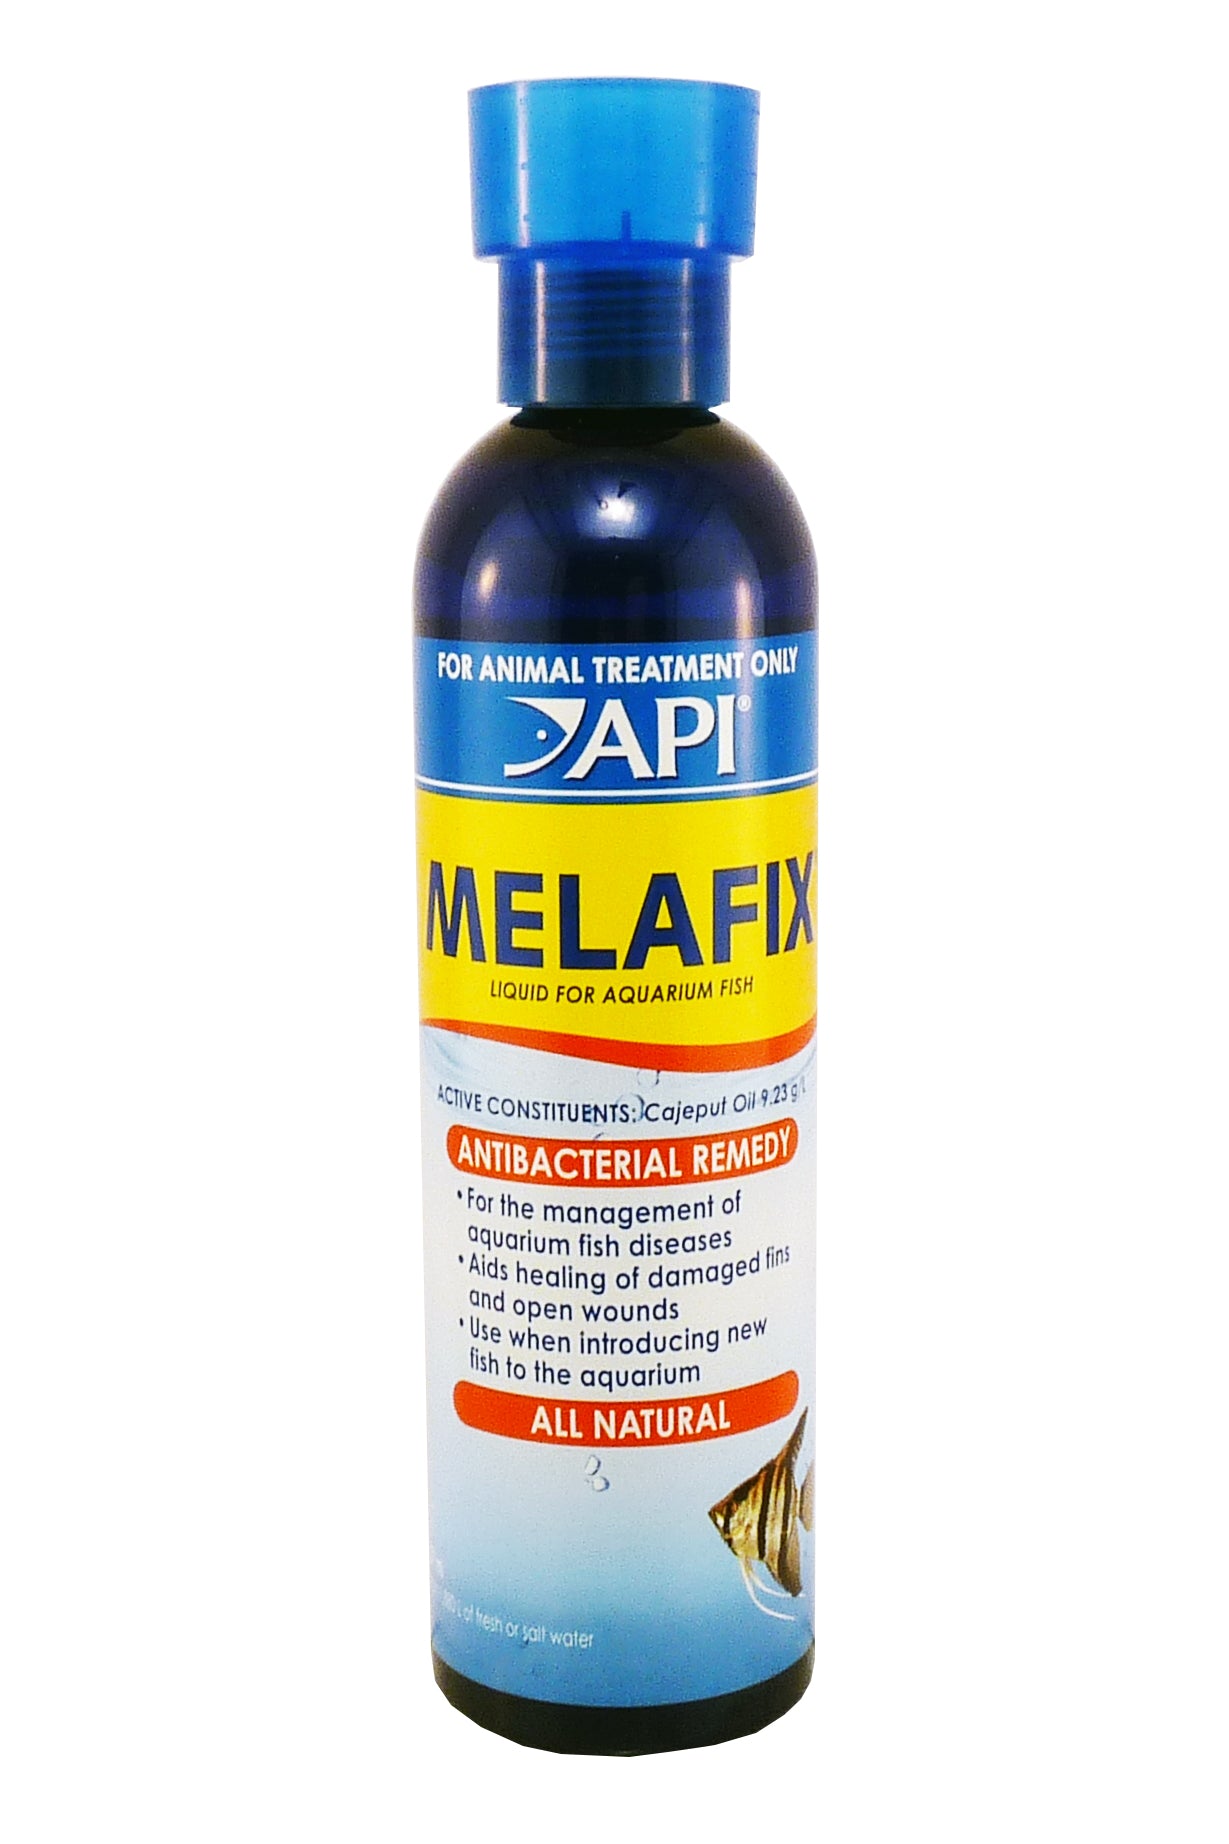 NAM Workable Fixative Spray, Mollies Make And Create NZ